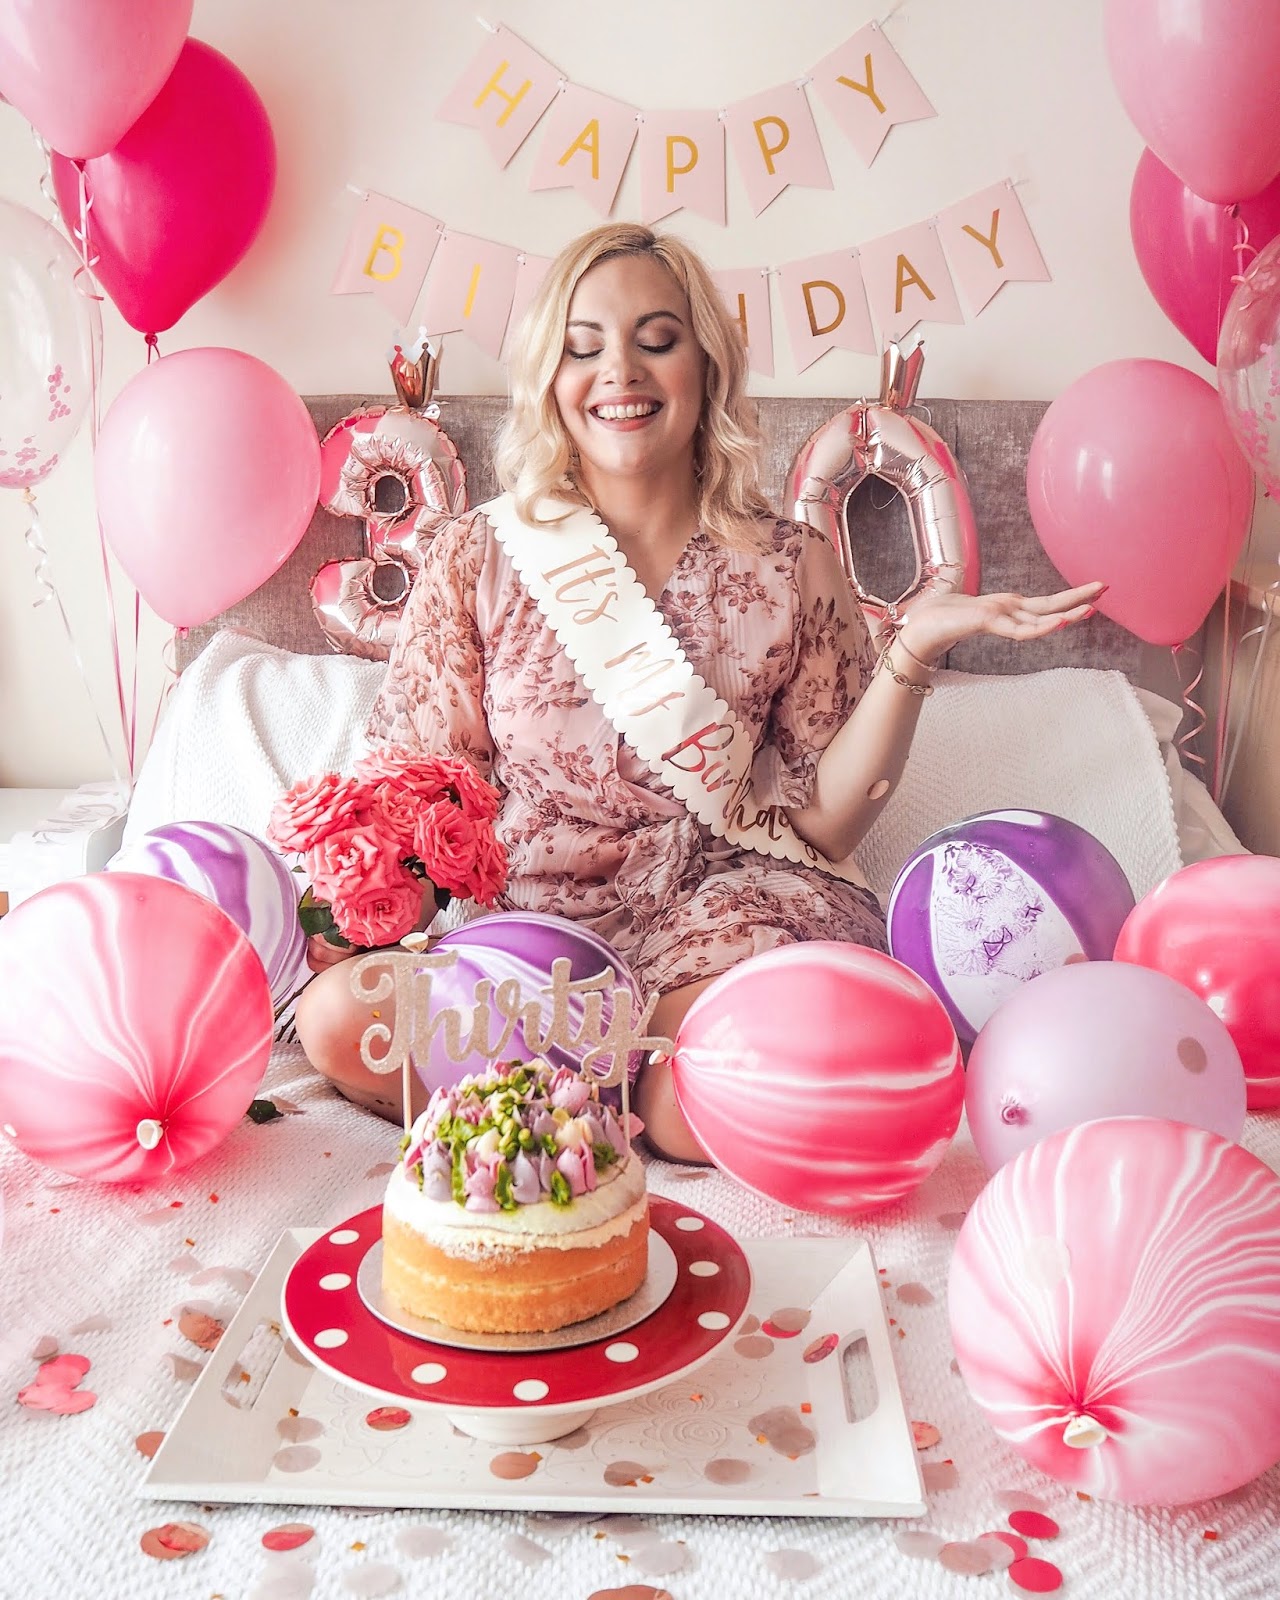 Giveaway: Celebrating 30 Years of Being Alive!, Katie Kirk Loves, UK Blogger, Beauty Blogger, Fashion Blogger, UK Influencer, Blog Giveaway, UK Giveway, Beauty Giveaway, Enter To Win, Competition, Prize, Win It Wednesday, Freebie Friday